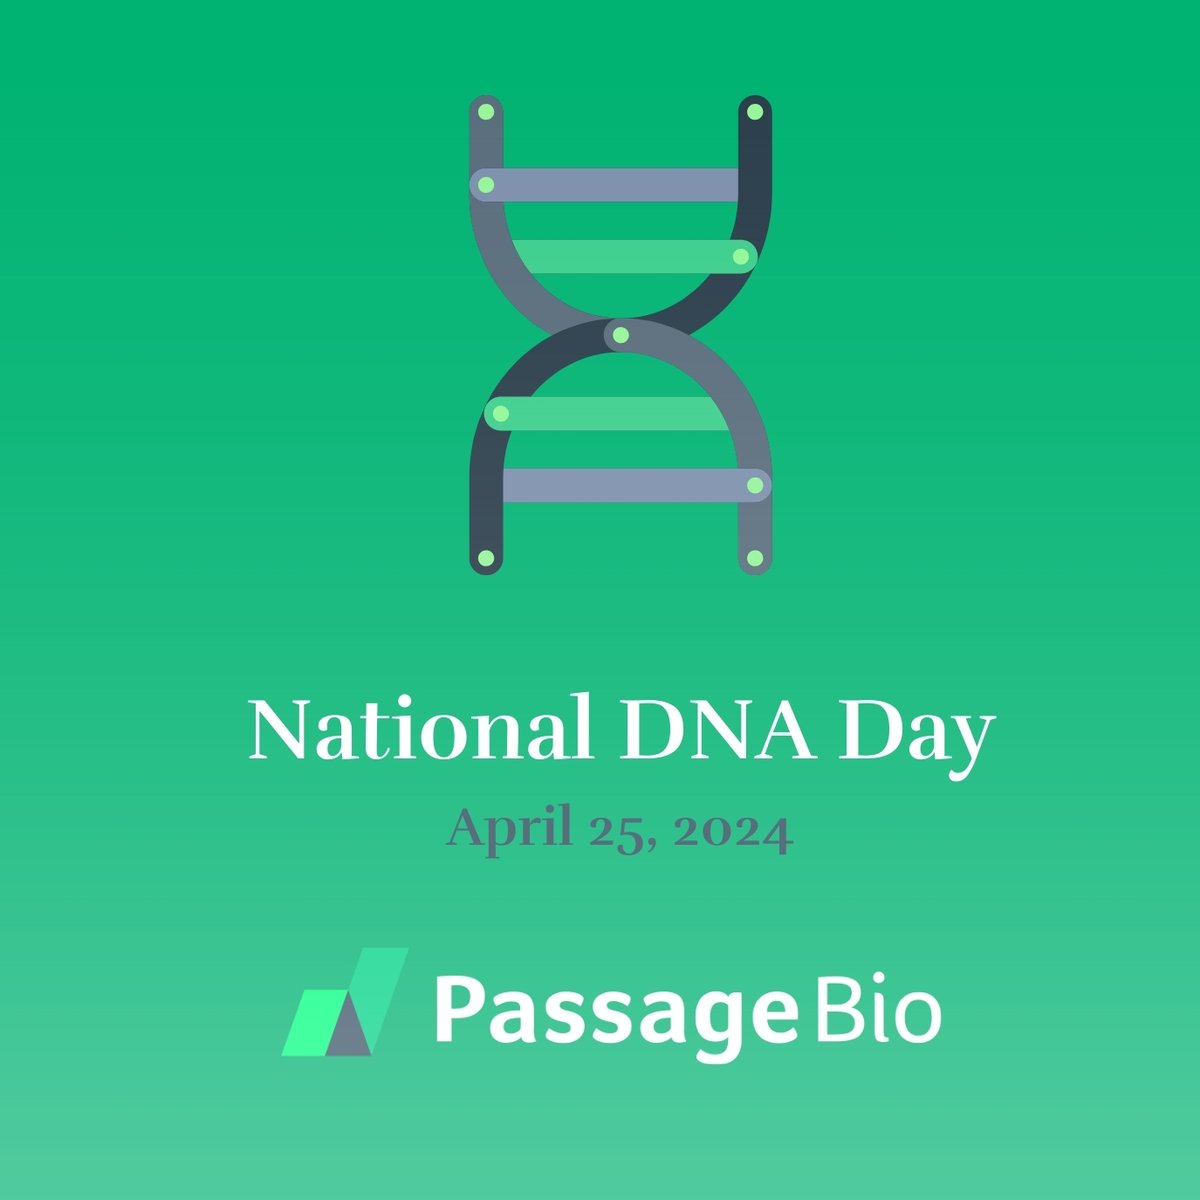 Happy #NationalDNADay from all of us at Passage Bio! 🧬 Today we are celebrating all the advancements made in the #geneticmedicine space that have helped pave the way for our vision. Learn more about our work in genetic medicine: loom.ly/hkMUF98